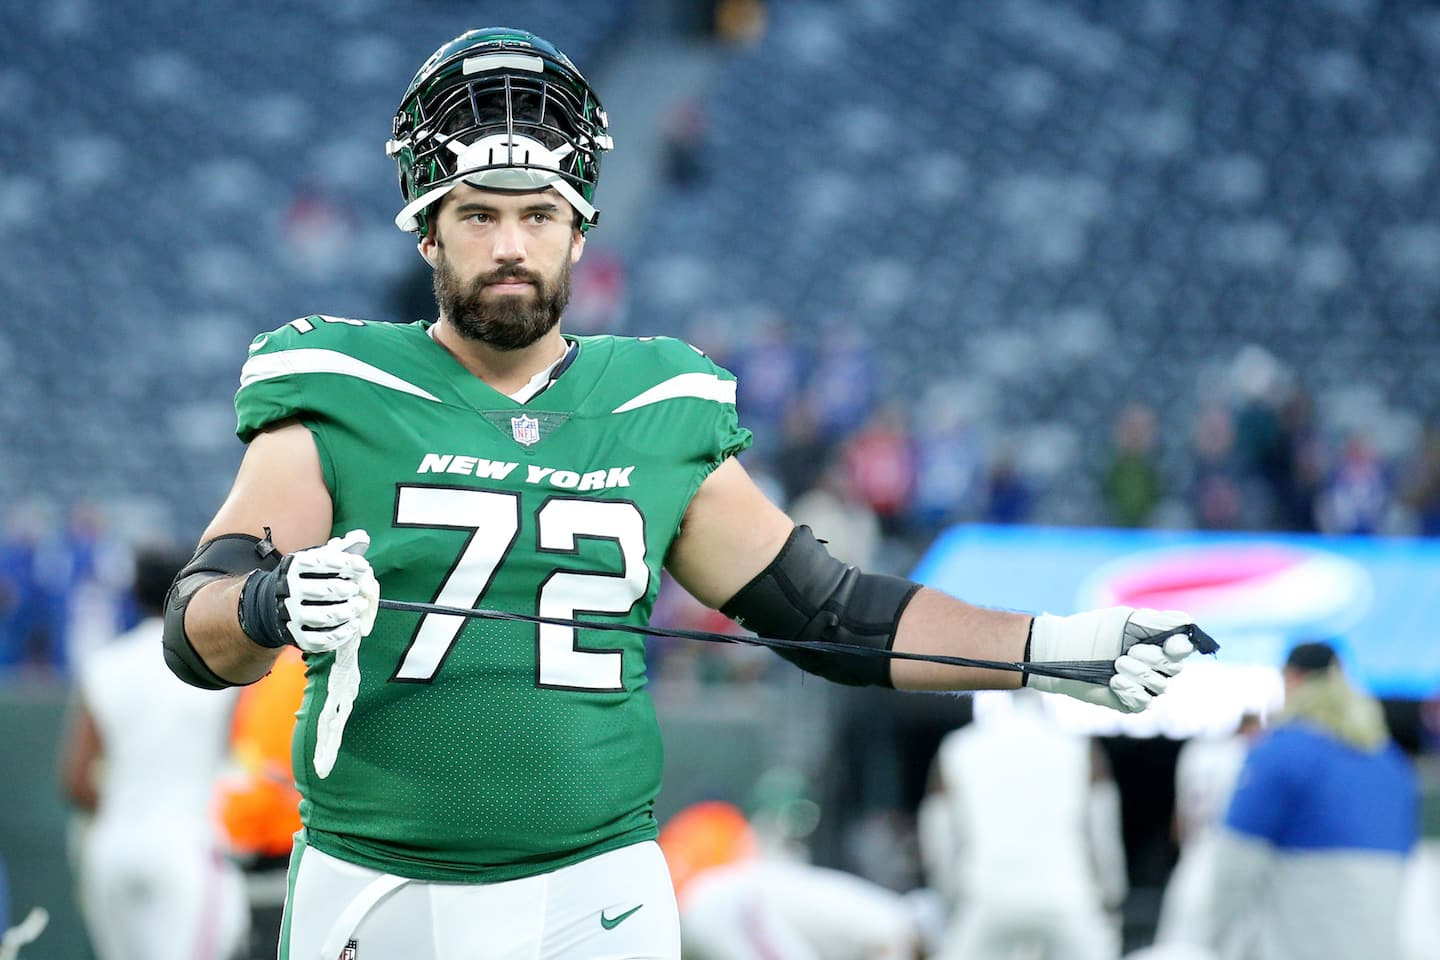 Would Duvernay-Tardif really play with the Alouettes?